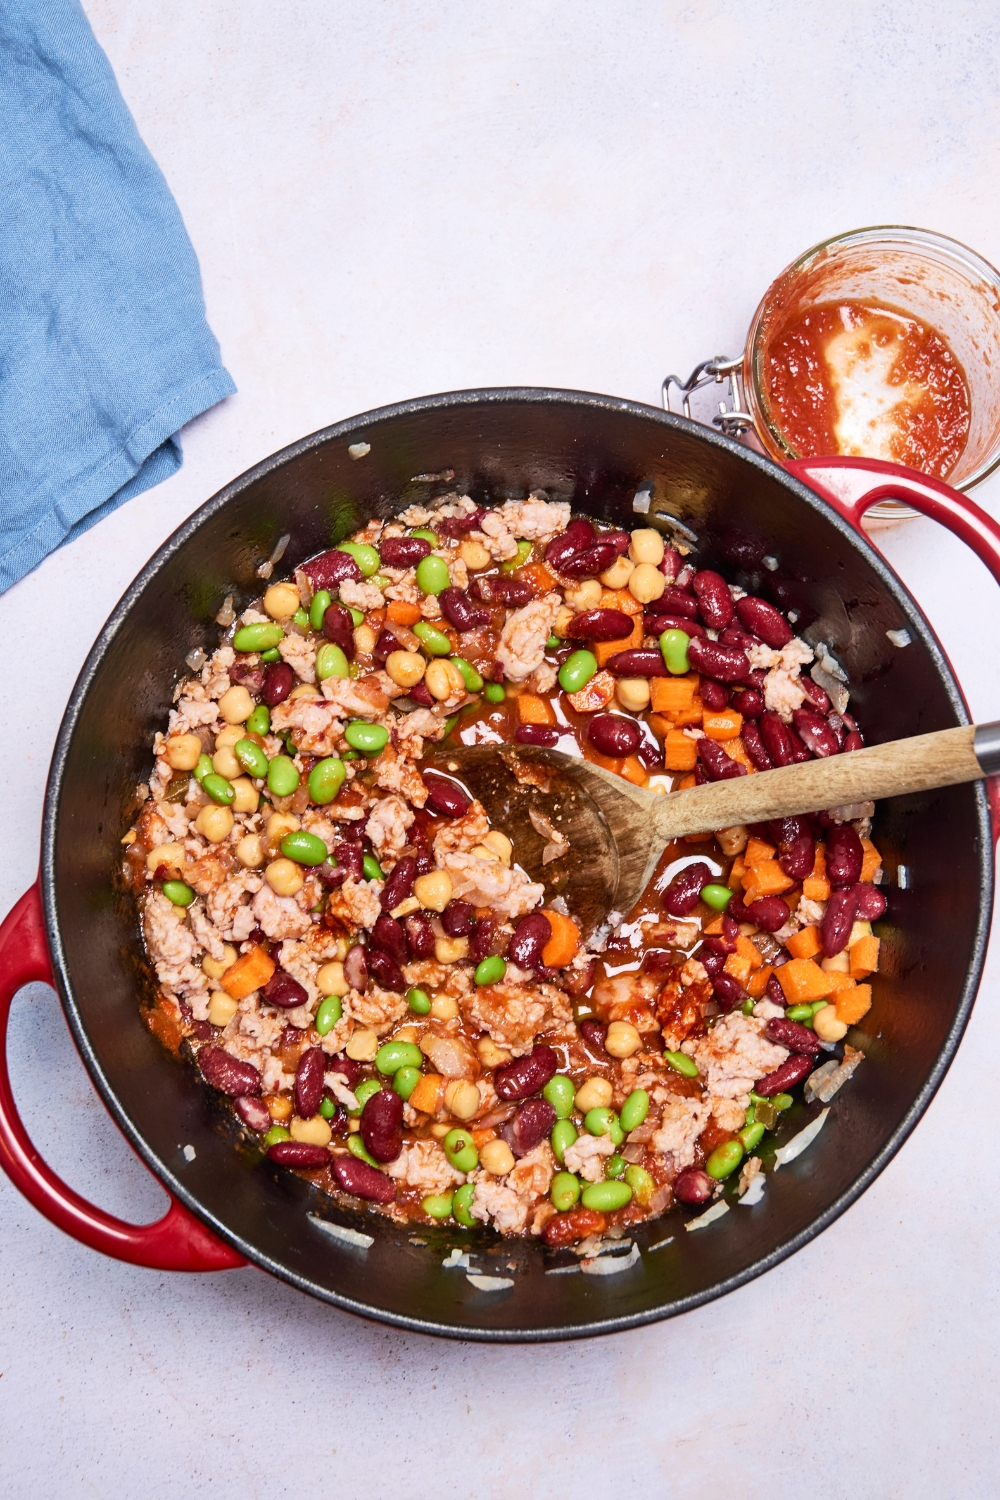 A pot is full of turkey chili. A wooden spoon mixes the ingredients in the pot.